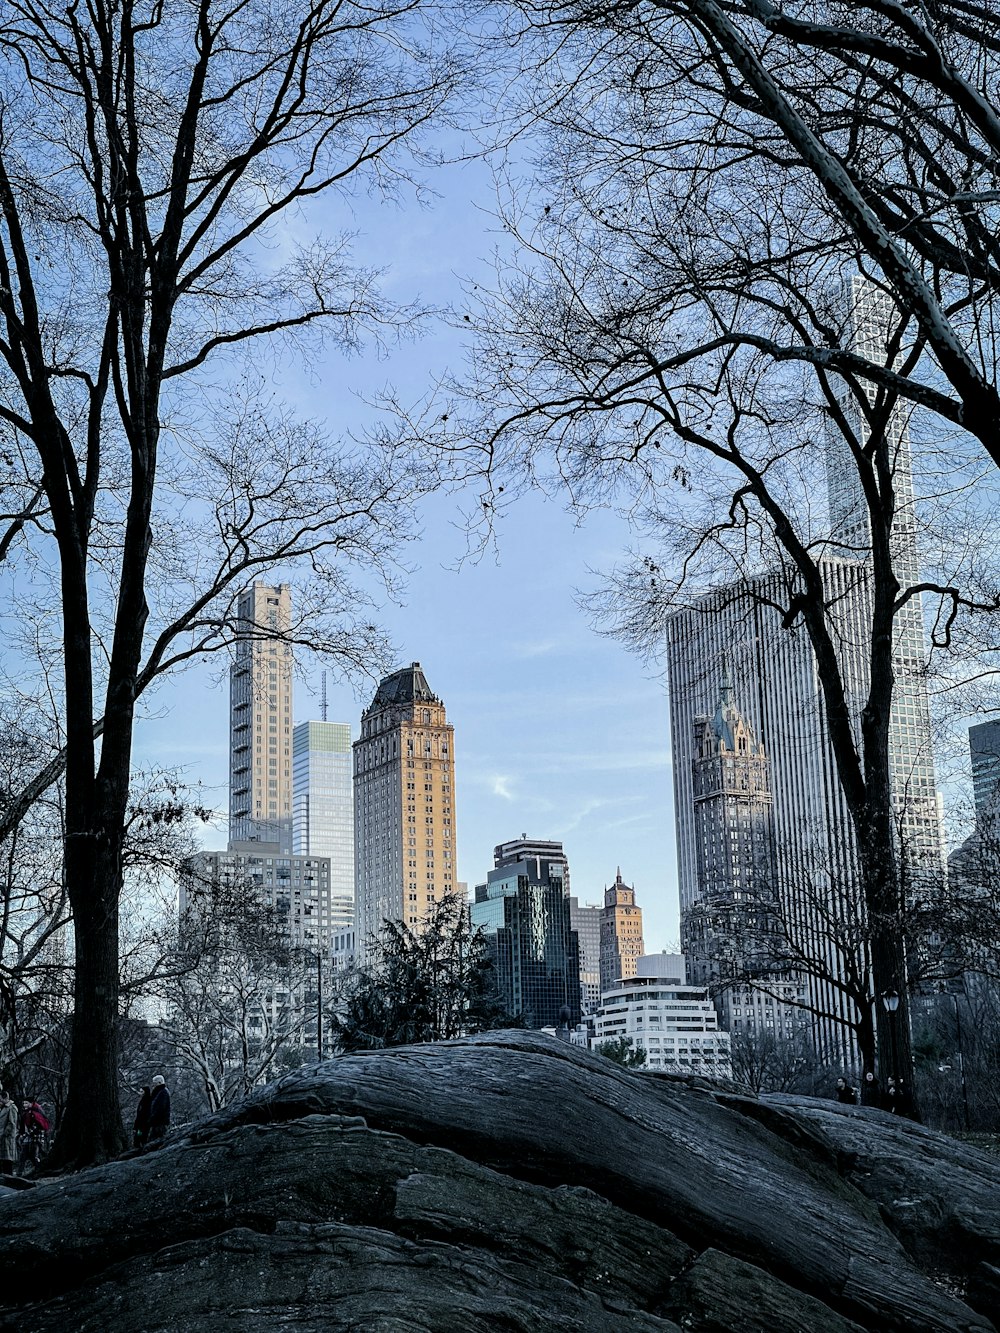 a view of a city from a park bench